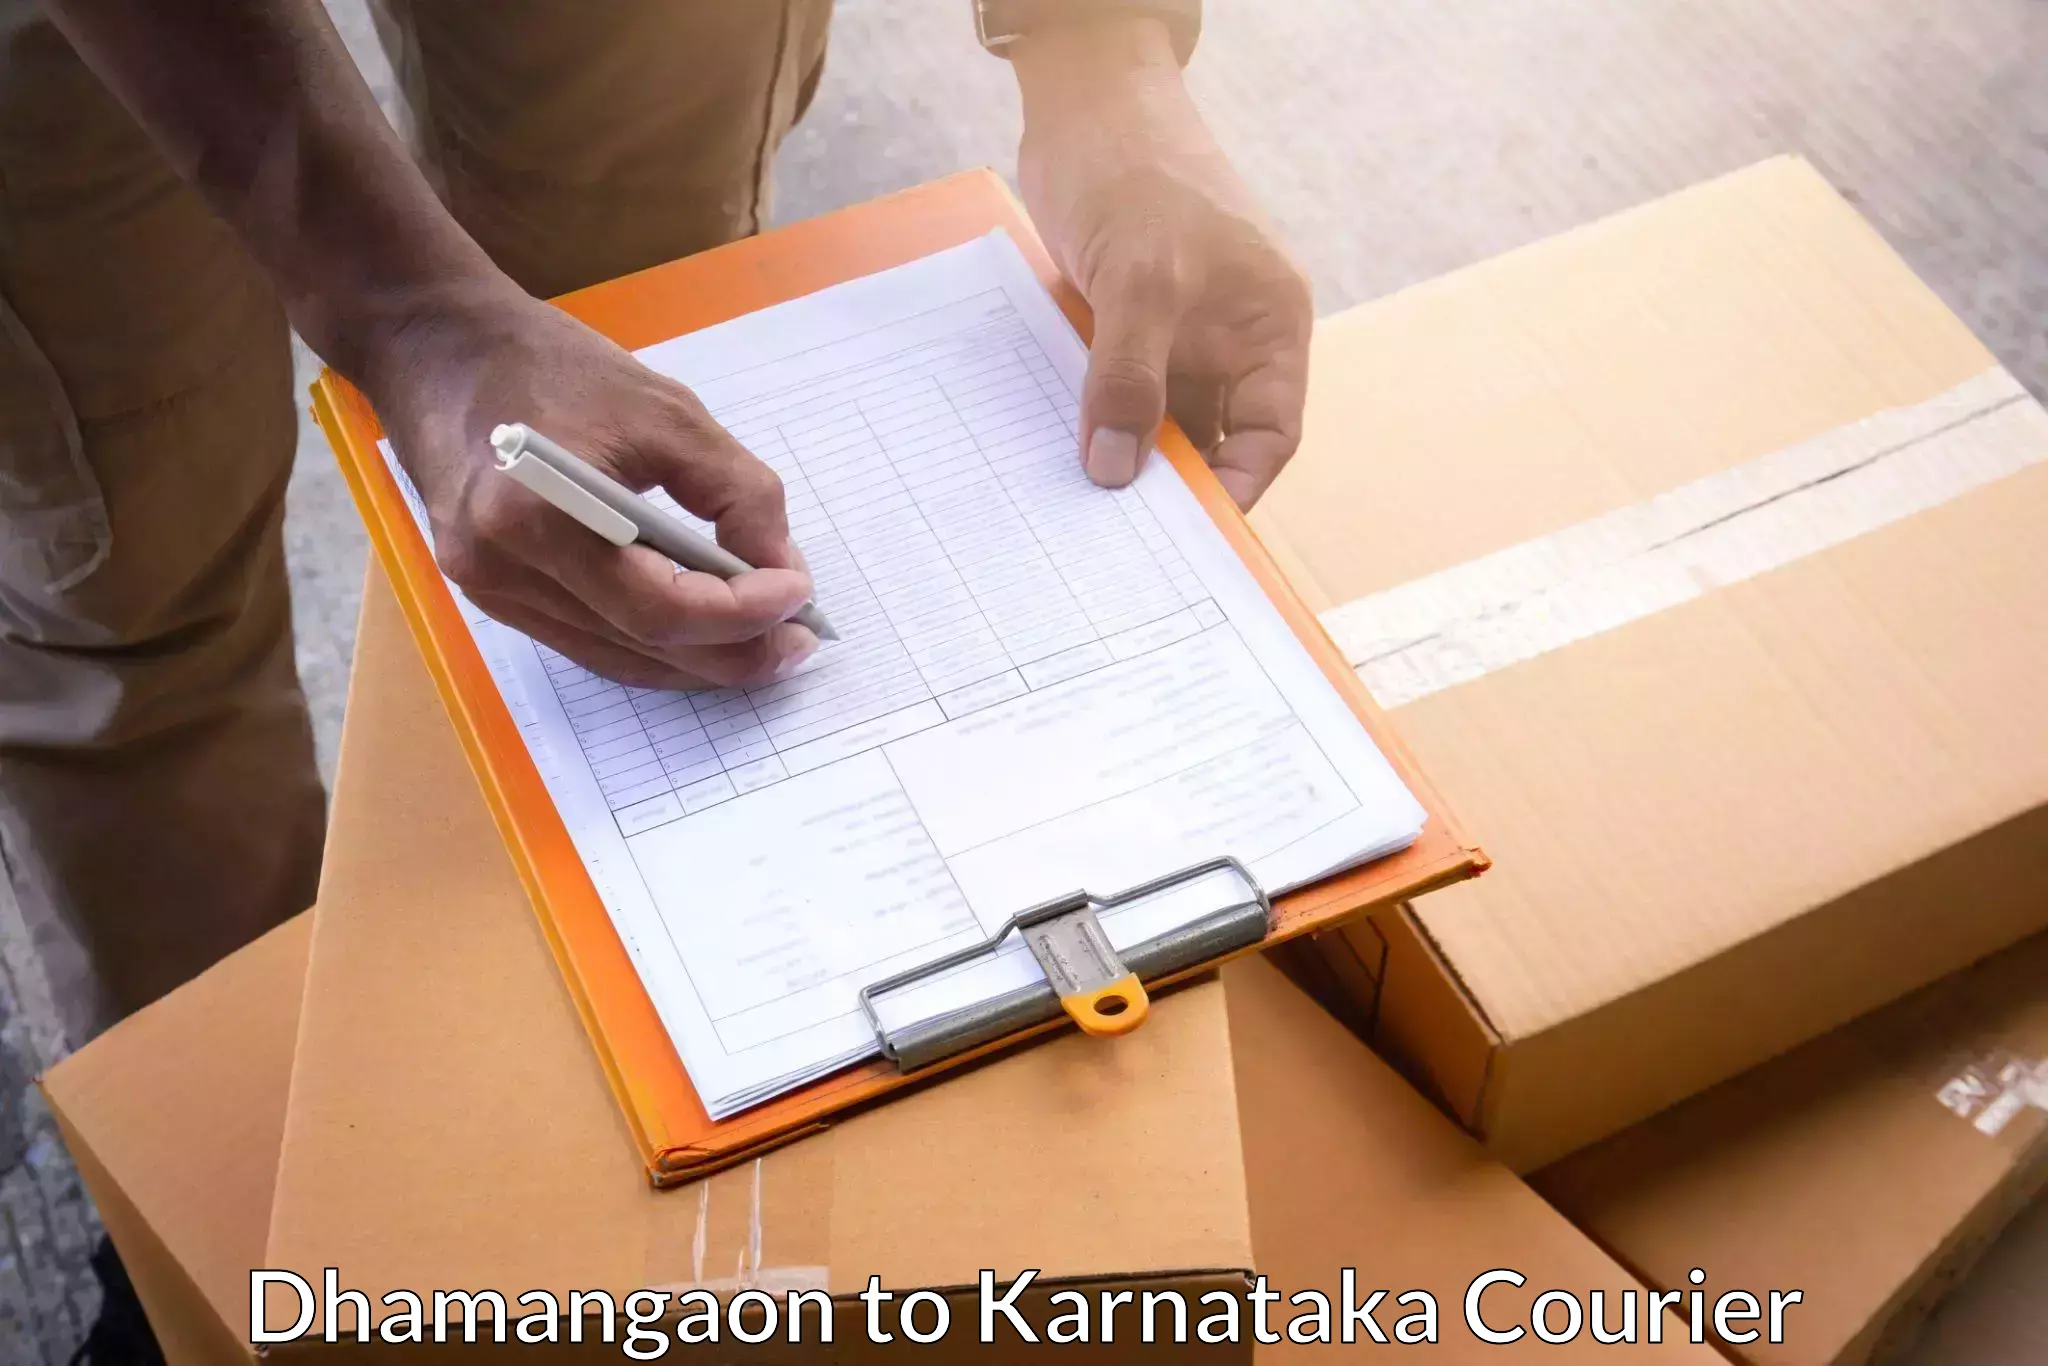 Express delivery capabilities in Dhamangaon to Ramanagara